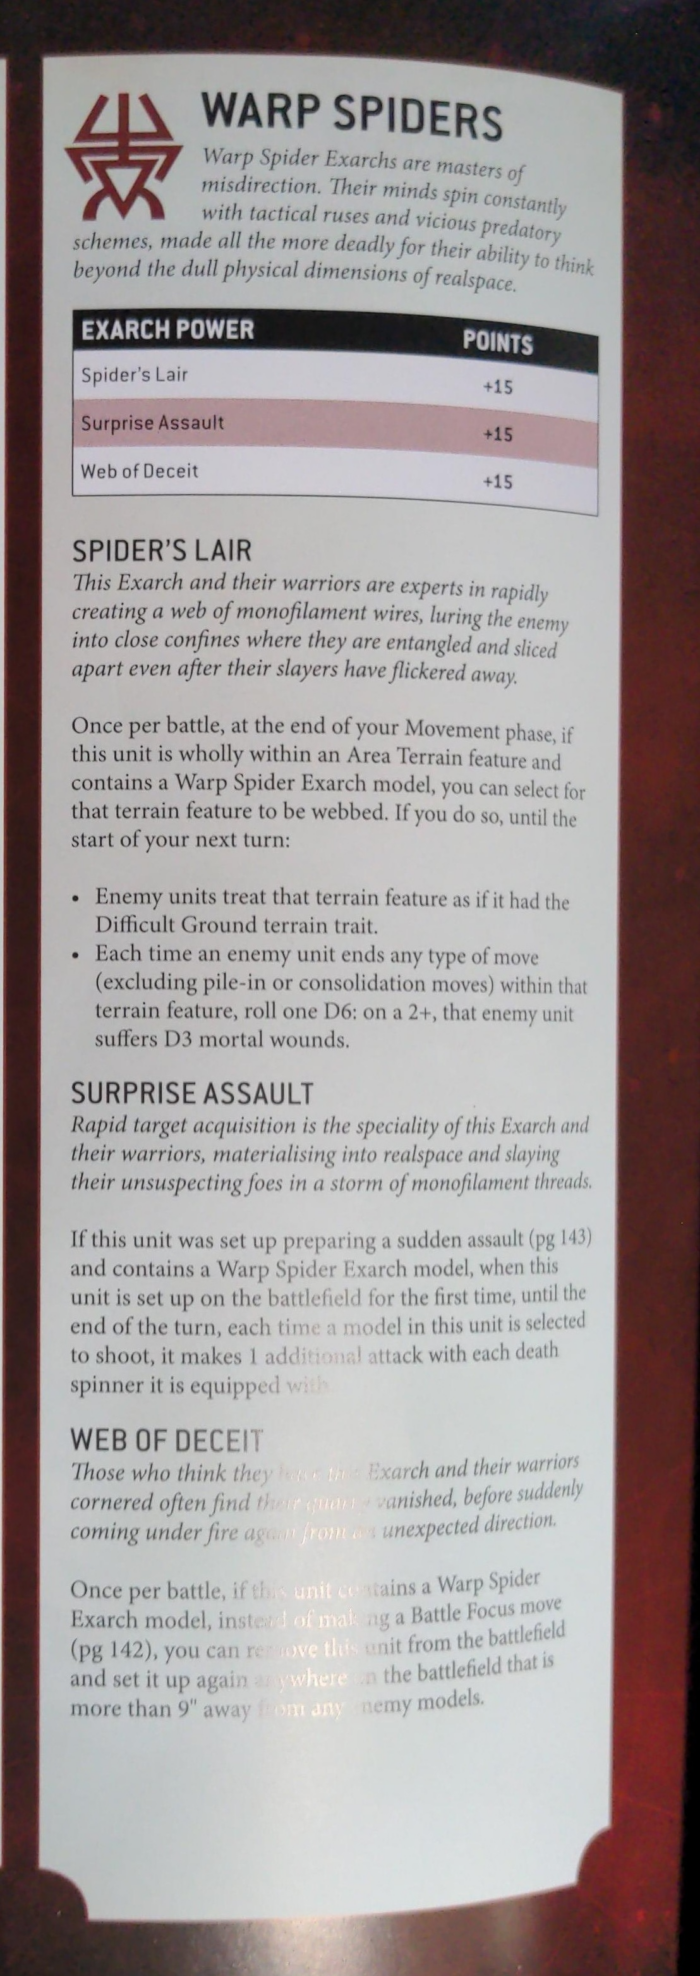 warp spiders exarch powers